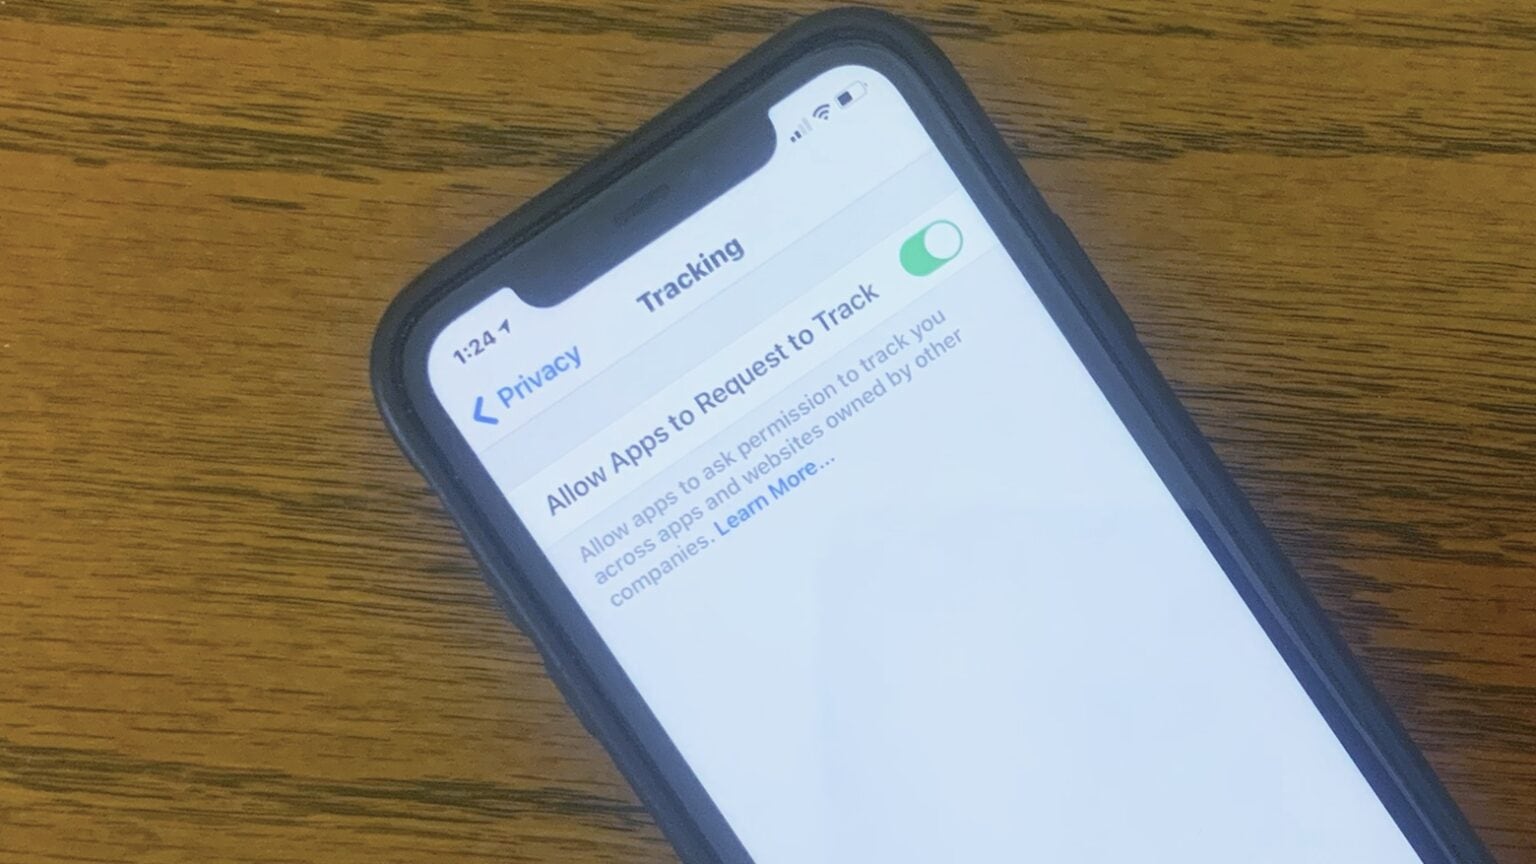 iOS 14 will do a bit less to protect your privacy